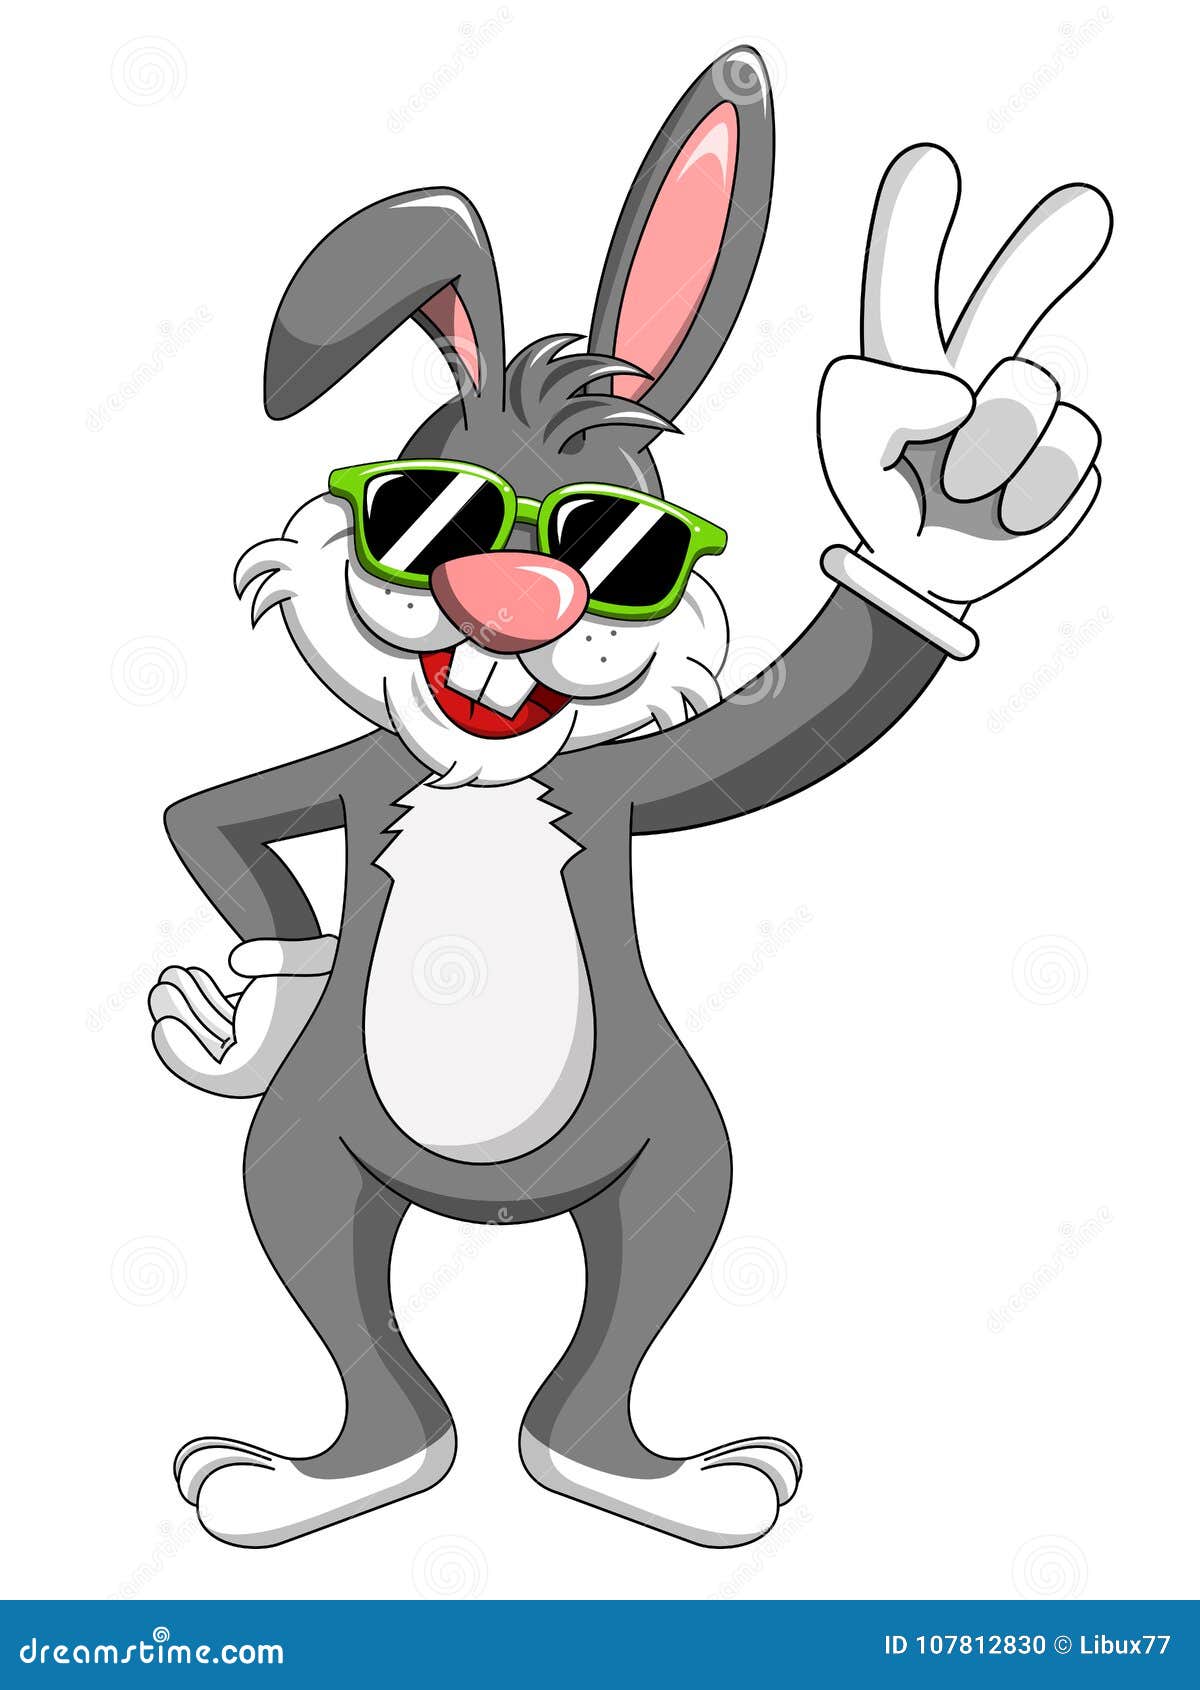 https://thumbs.dreamstime.com/z/cool-bunny-rabbit-victory-hand-sign-isolated-white-cool-bunny-rabbit-victory-hand-sign-isolated-107812830.jpg